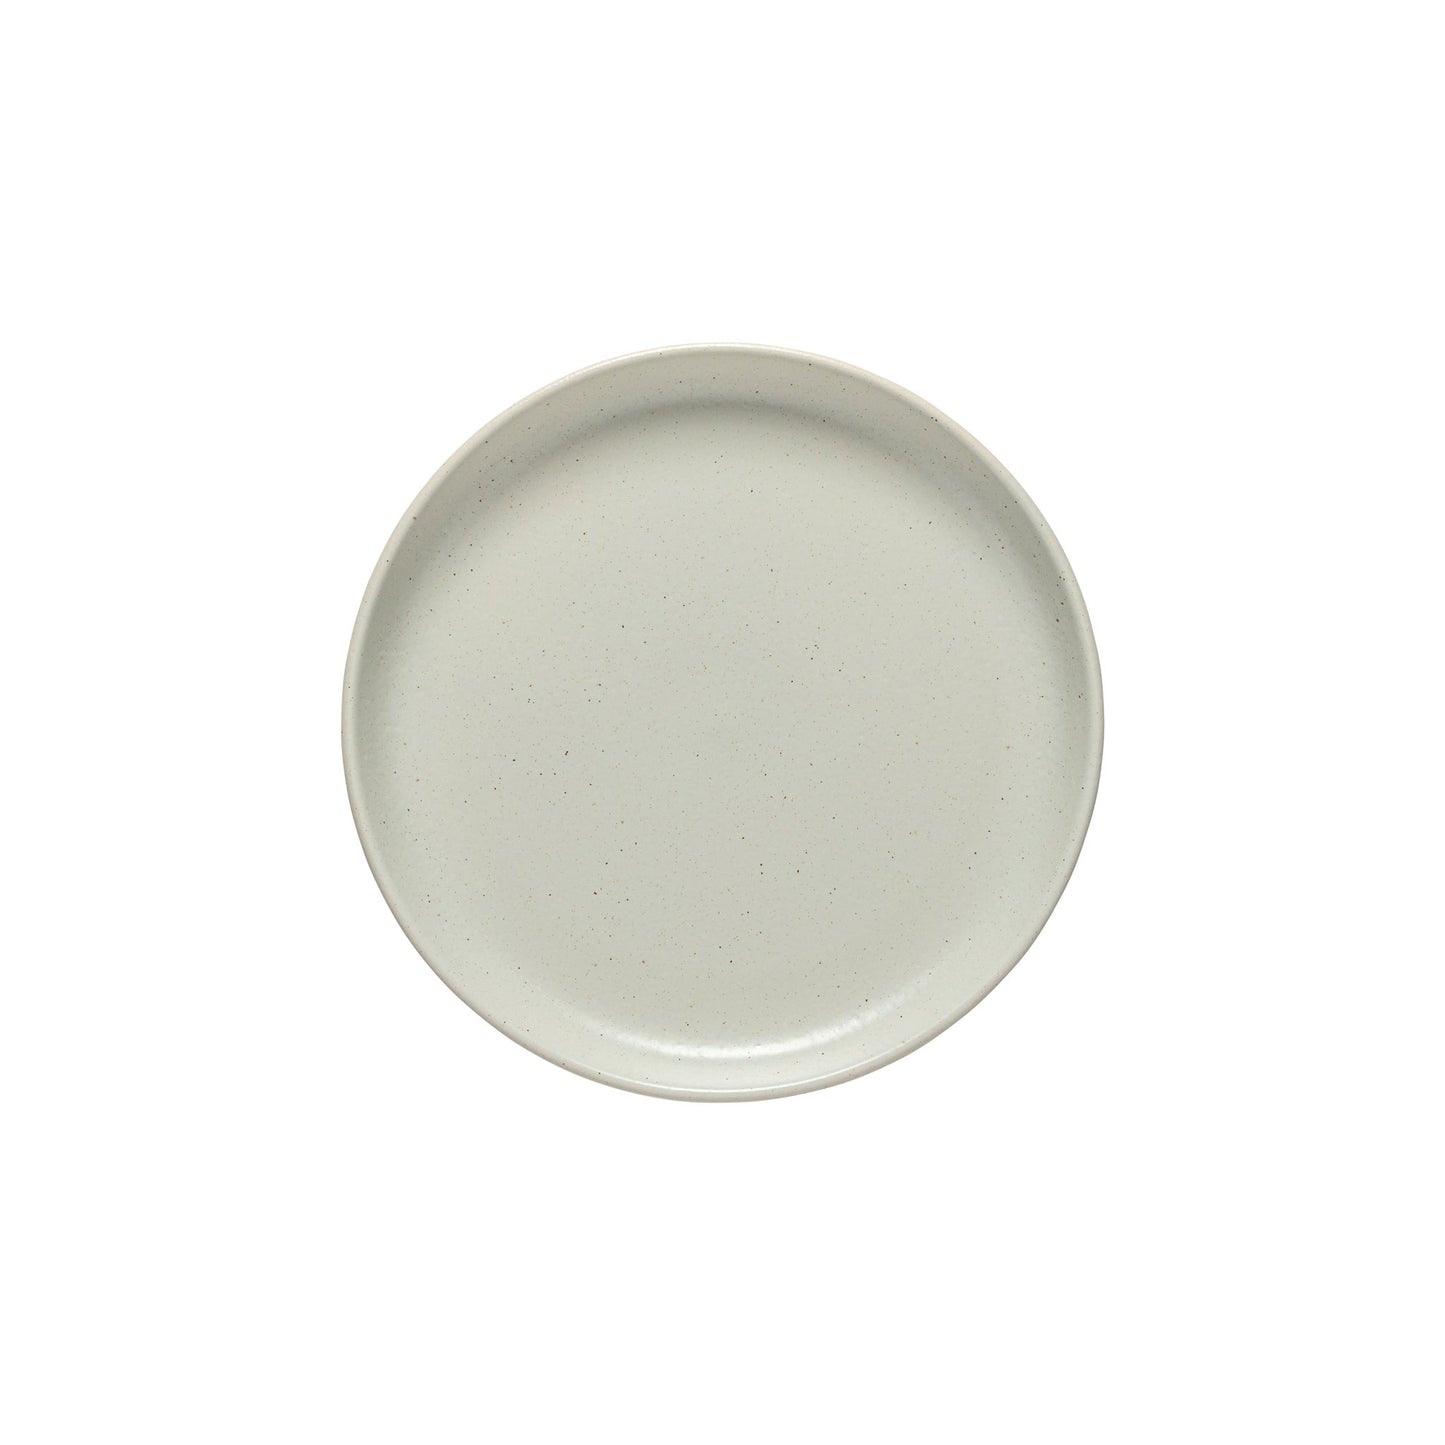 Pacifica Oyster Grey Salad plate